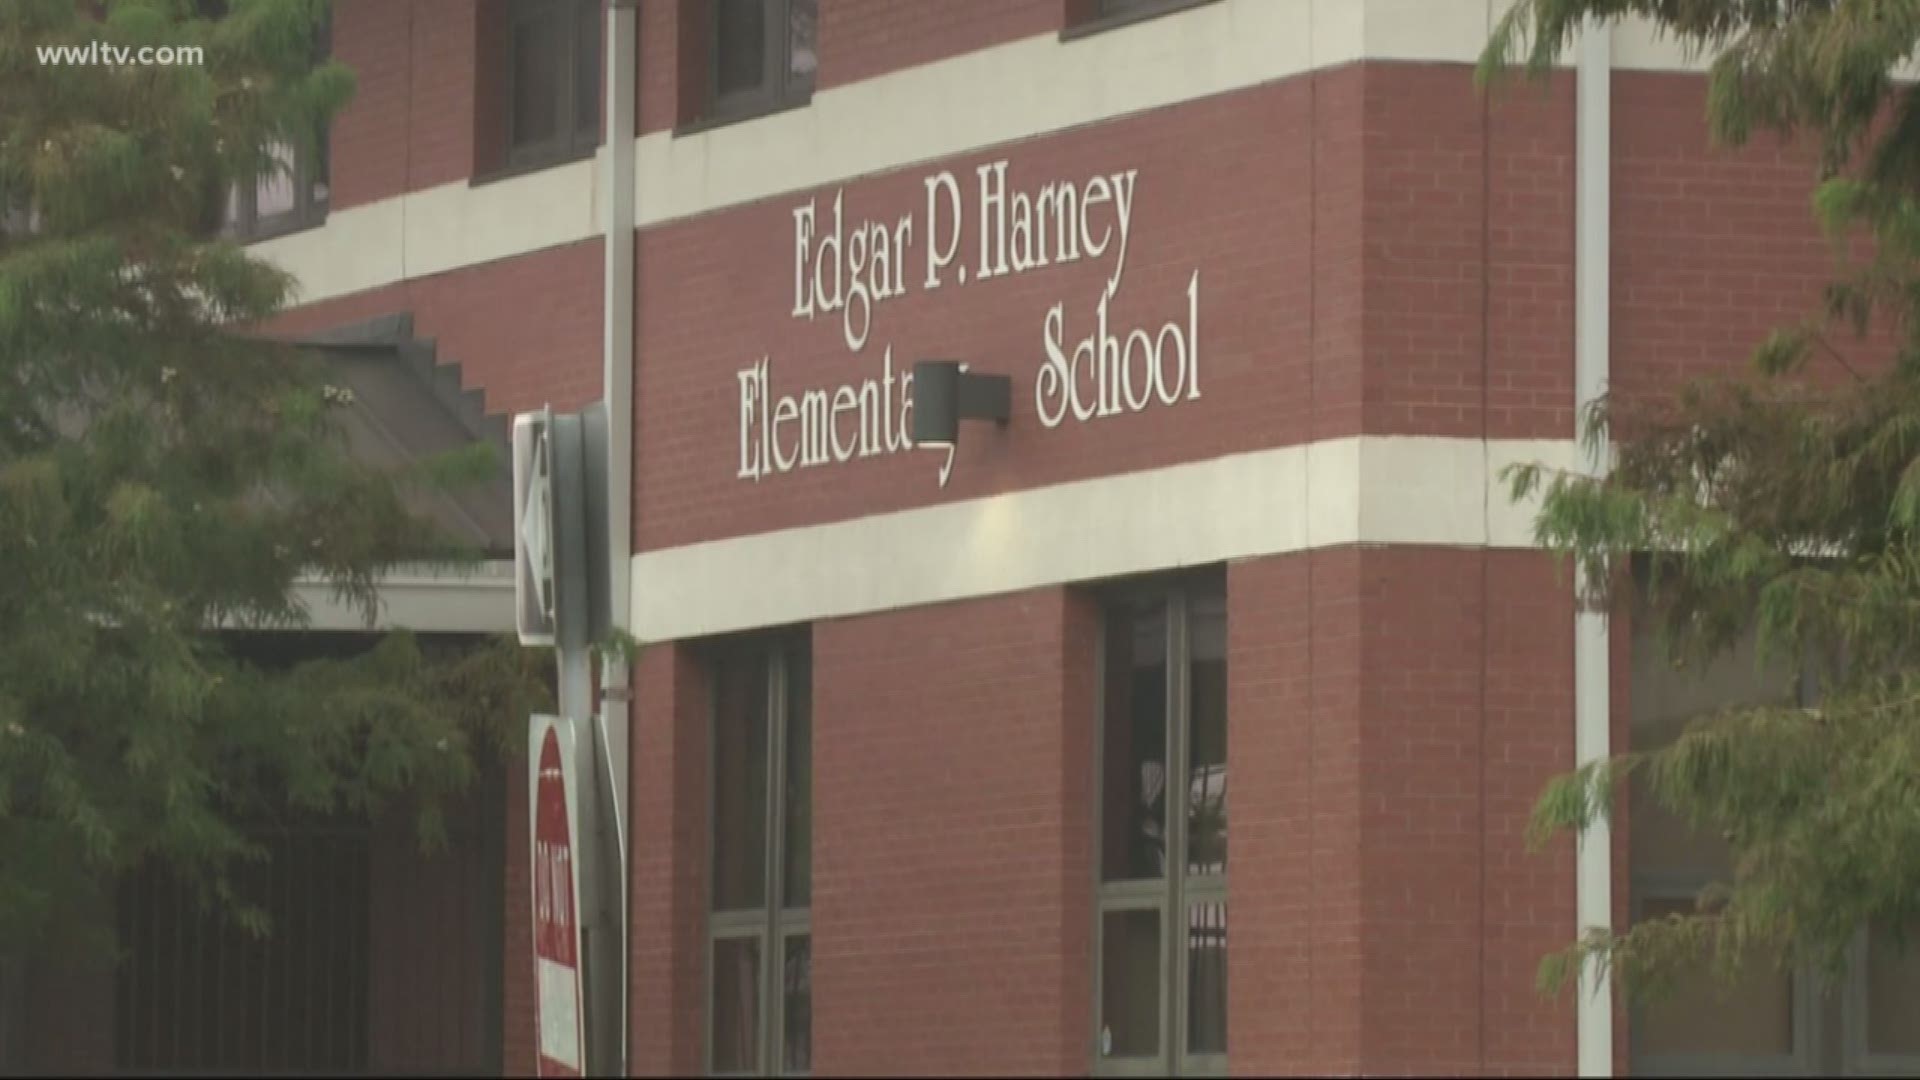 Officials say the school has received 'F' grades in recent state ratings.